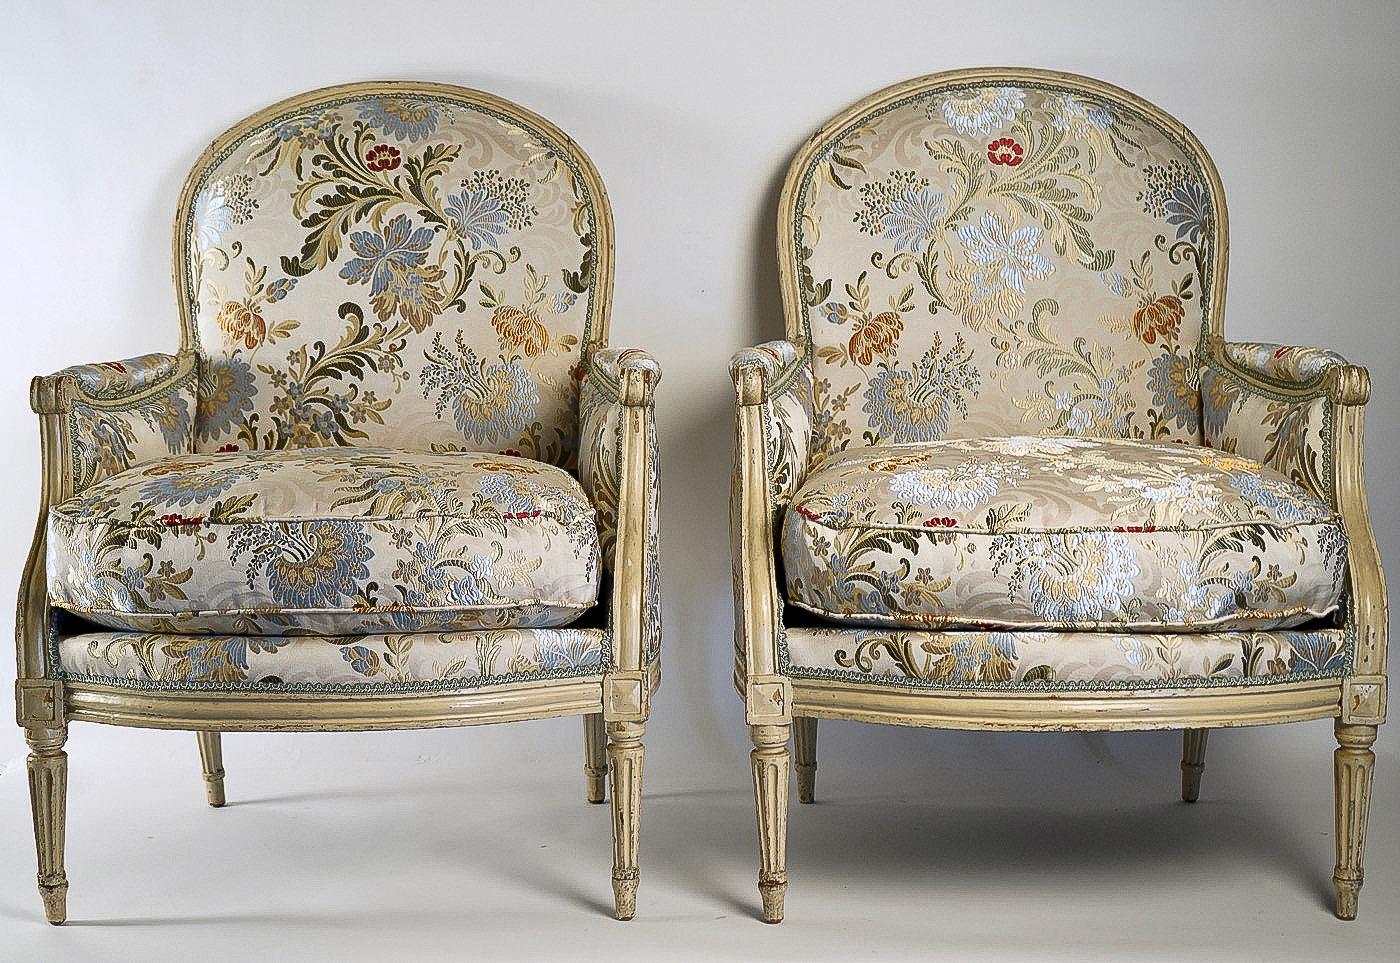 French 18th-Century, Lacquered Beech-Wood Pair of Large Bergeres Louis XVI Period Circa 1780

A fantastic pair of large armchairs or Bergeres, in hand-carved lacquered beech-wood.

French work in the classic Louis XVI style, late-18th-century, circa